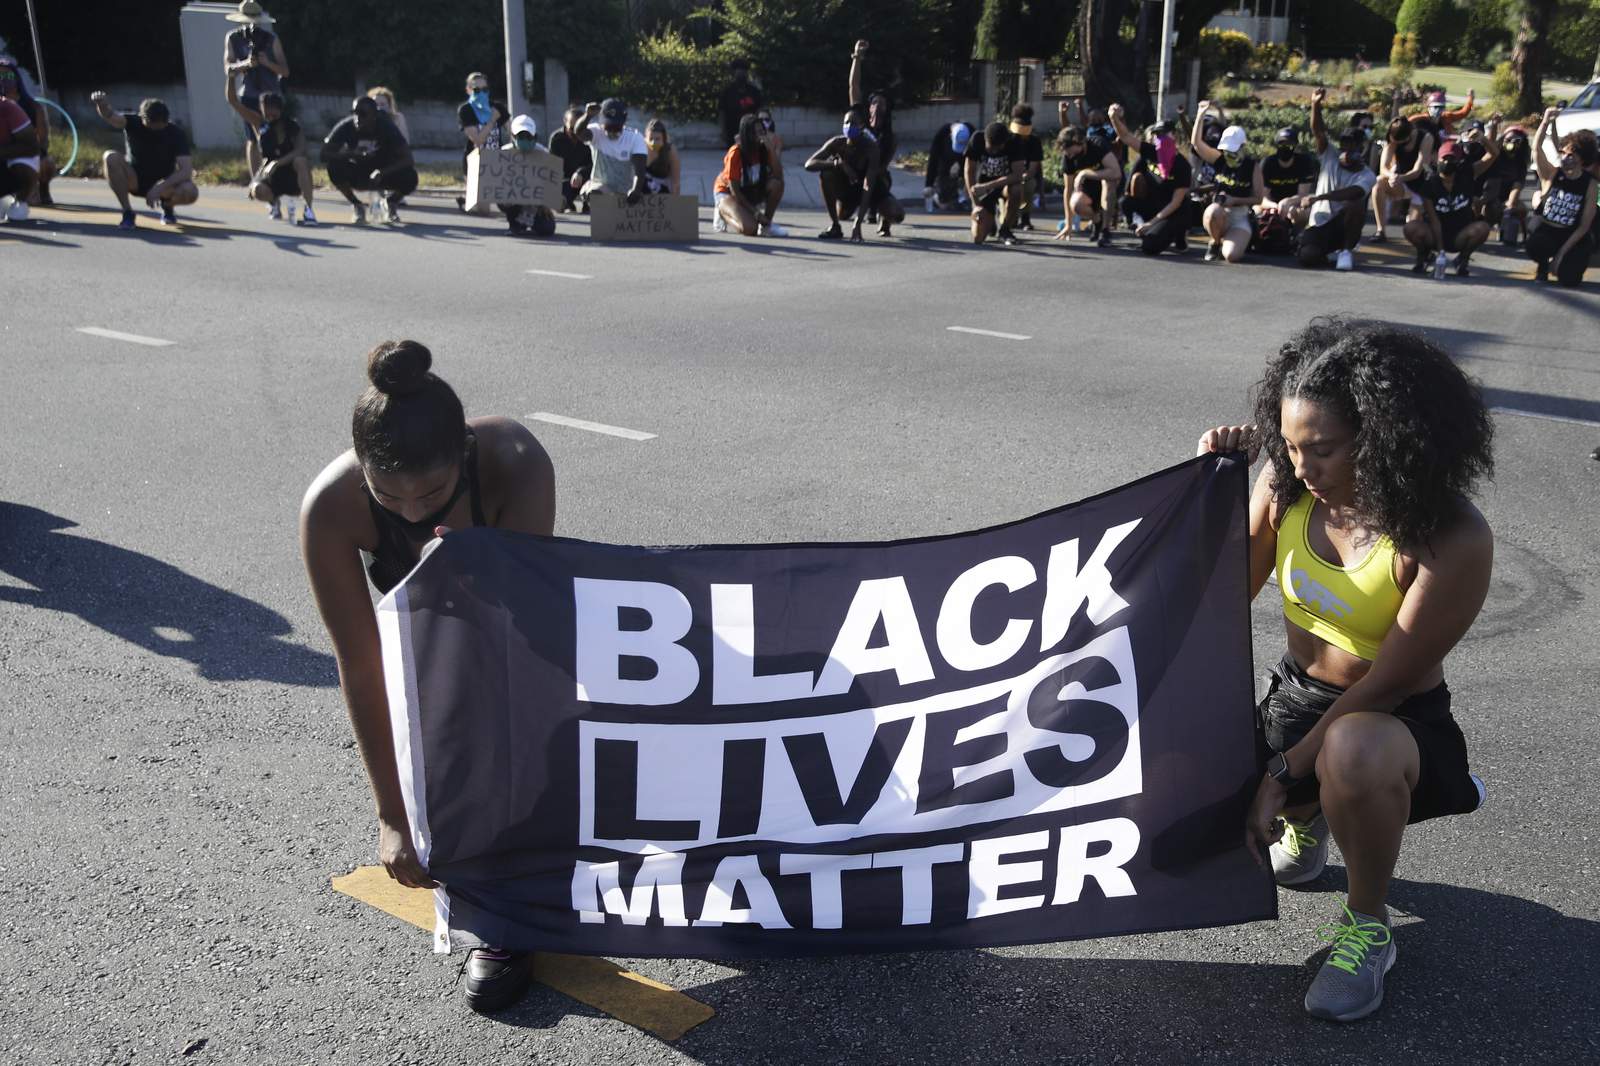 Police guide that calls BLM a terrorist group draws outrage